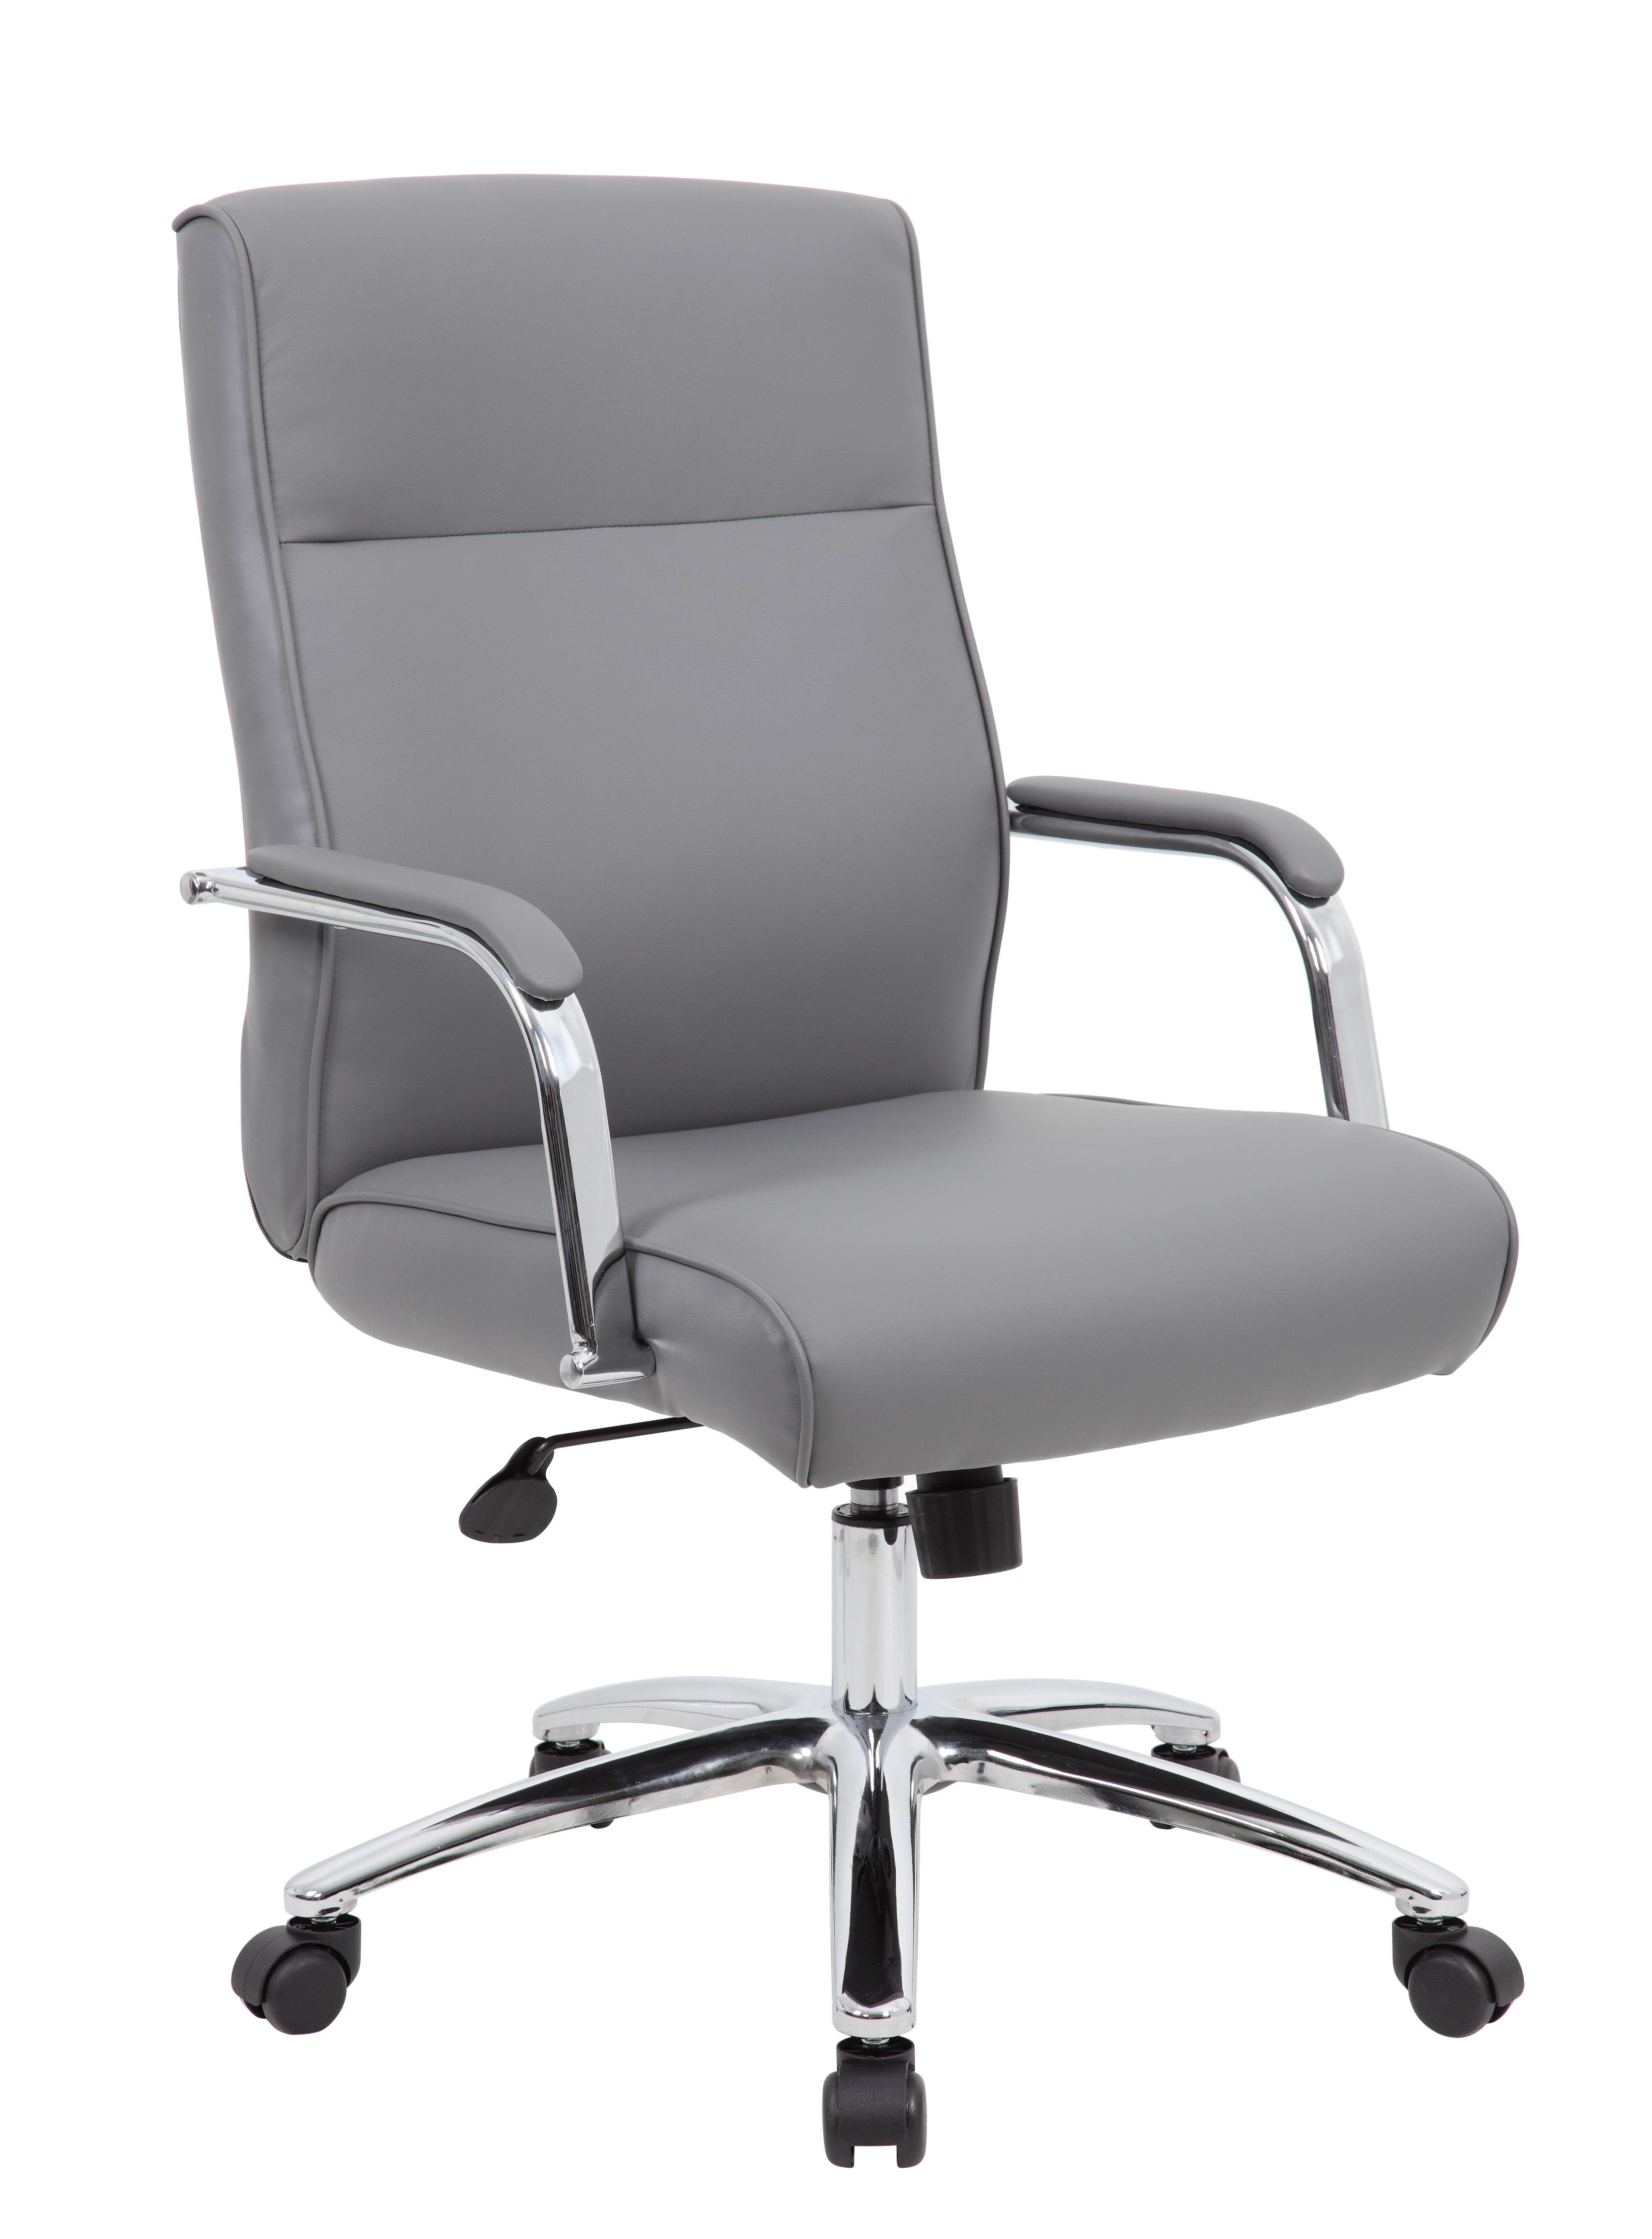 B696c-gy Modern Executive Conference Chair, Grey